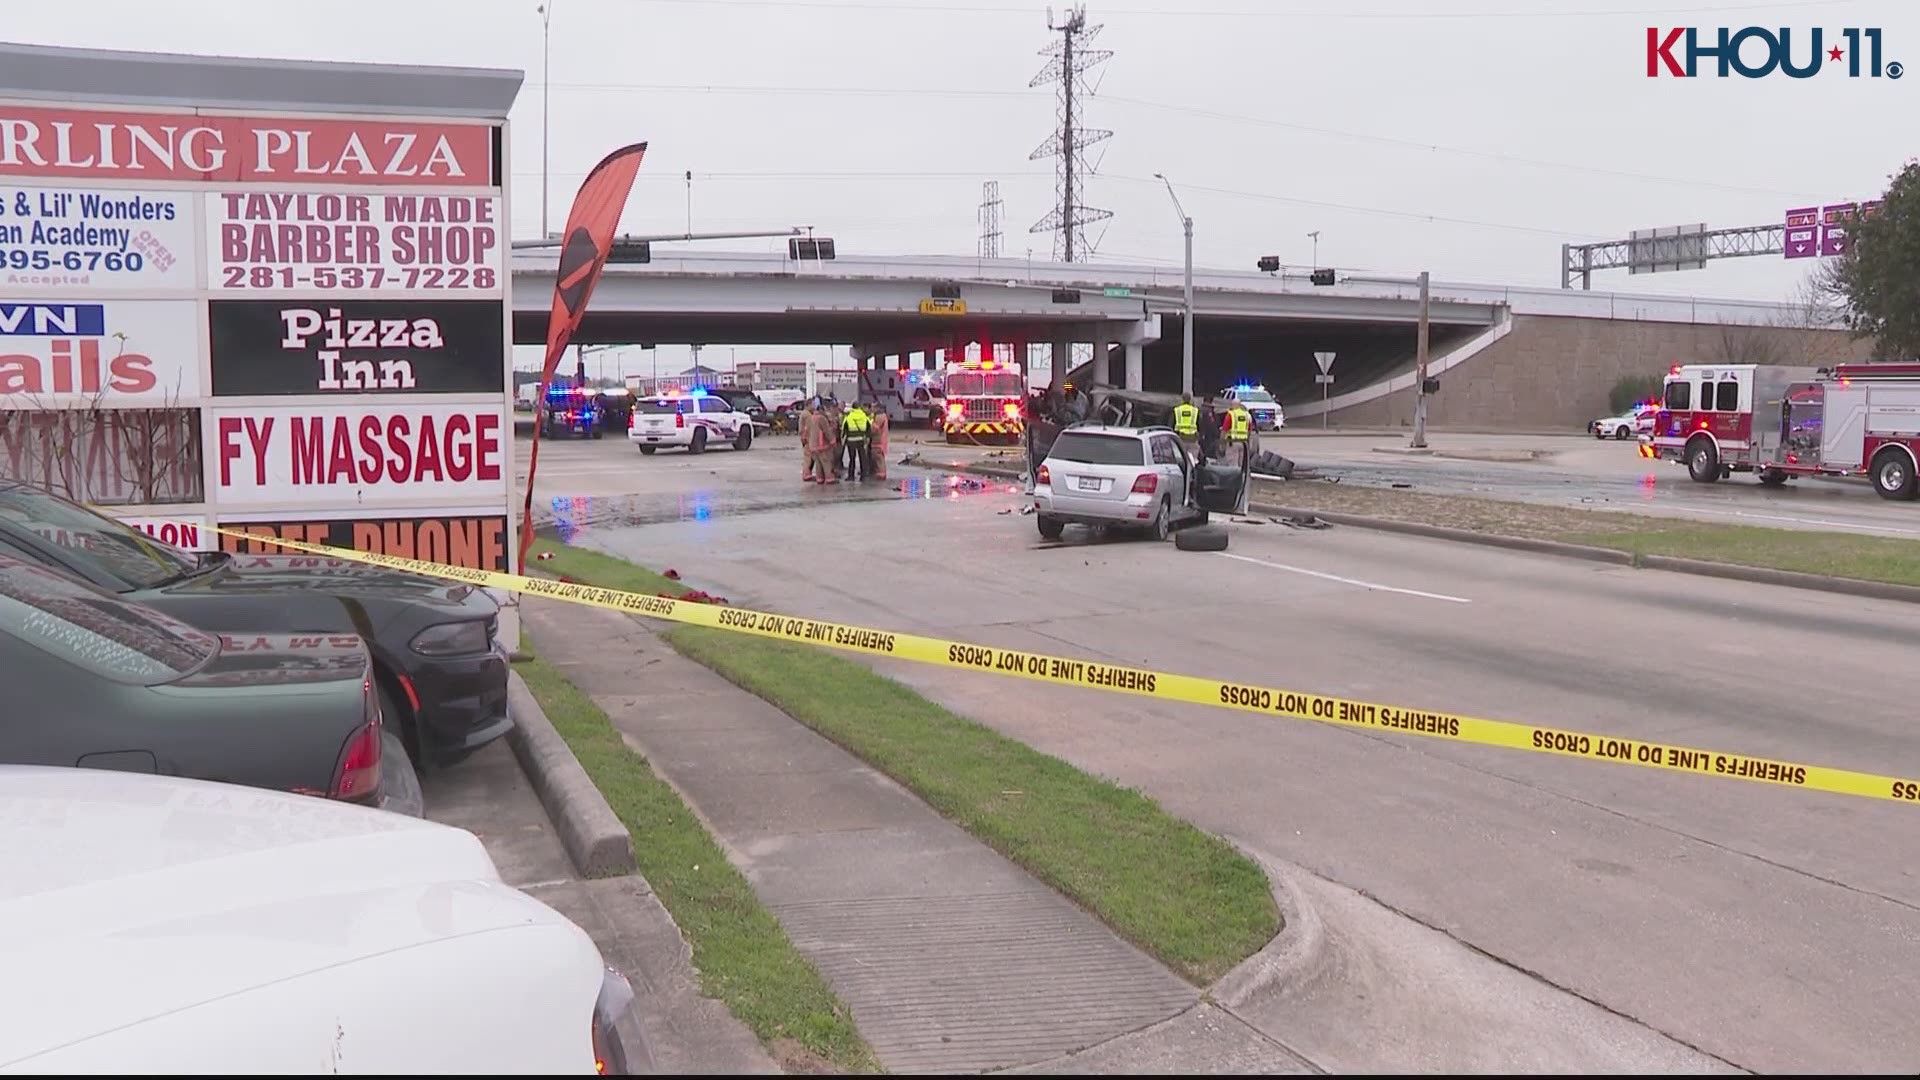 Harris County Precinct 4 authorities said three vehicles were involved in the crash on Antoine at the Beltway feeder.